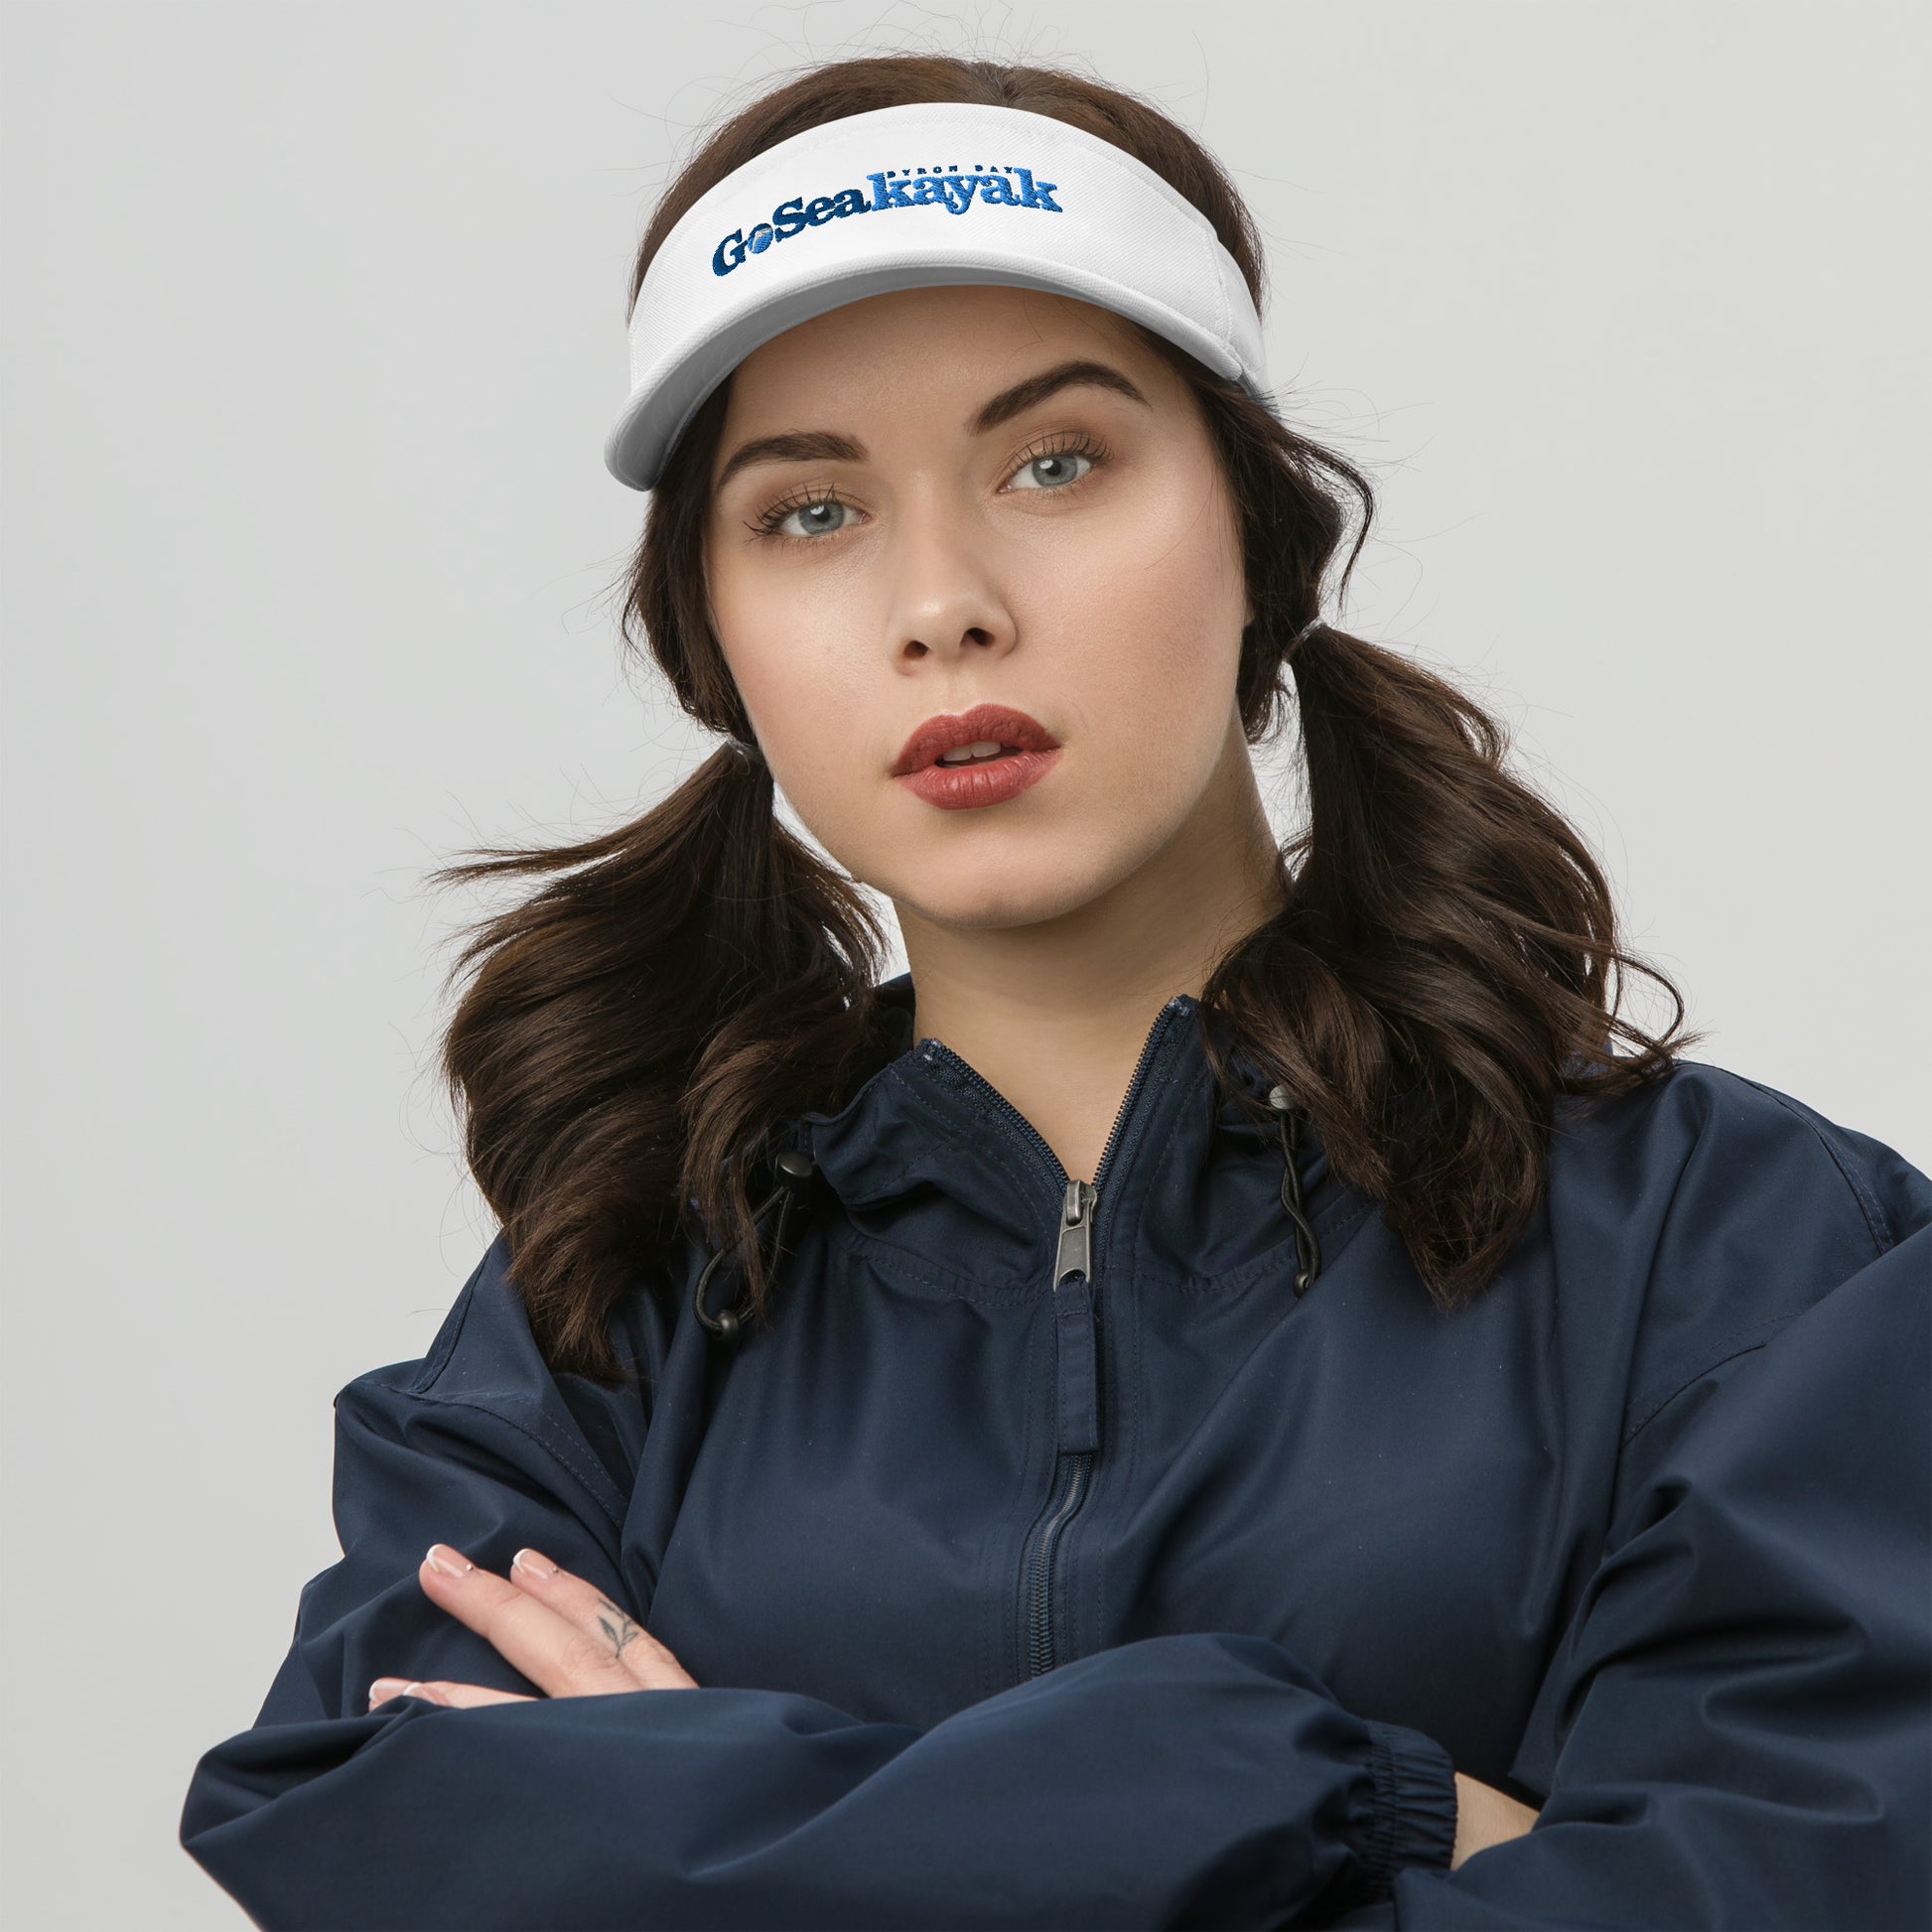  Visor - White - Front view, on woman standing with arms crossed - Go Sea Kayak Byron bay logo on front - Genuine Byron Bay Merchandise | Produced by Go Sea Kayak Byron Bay 